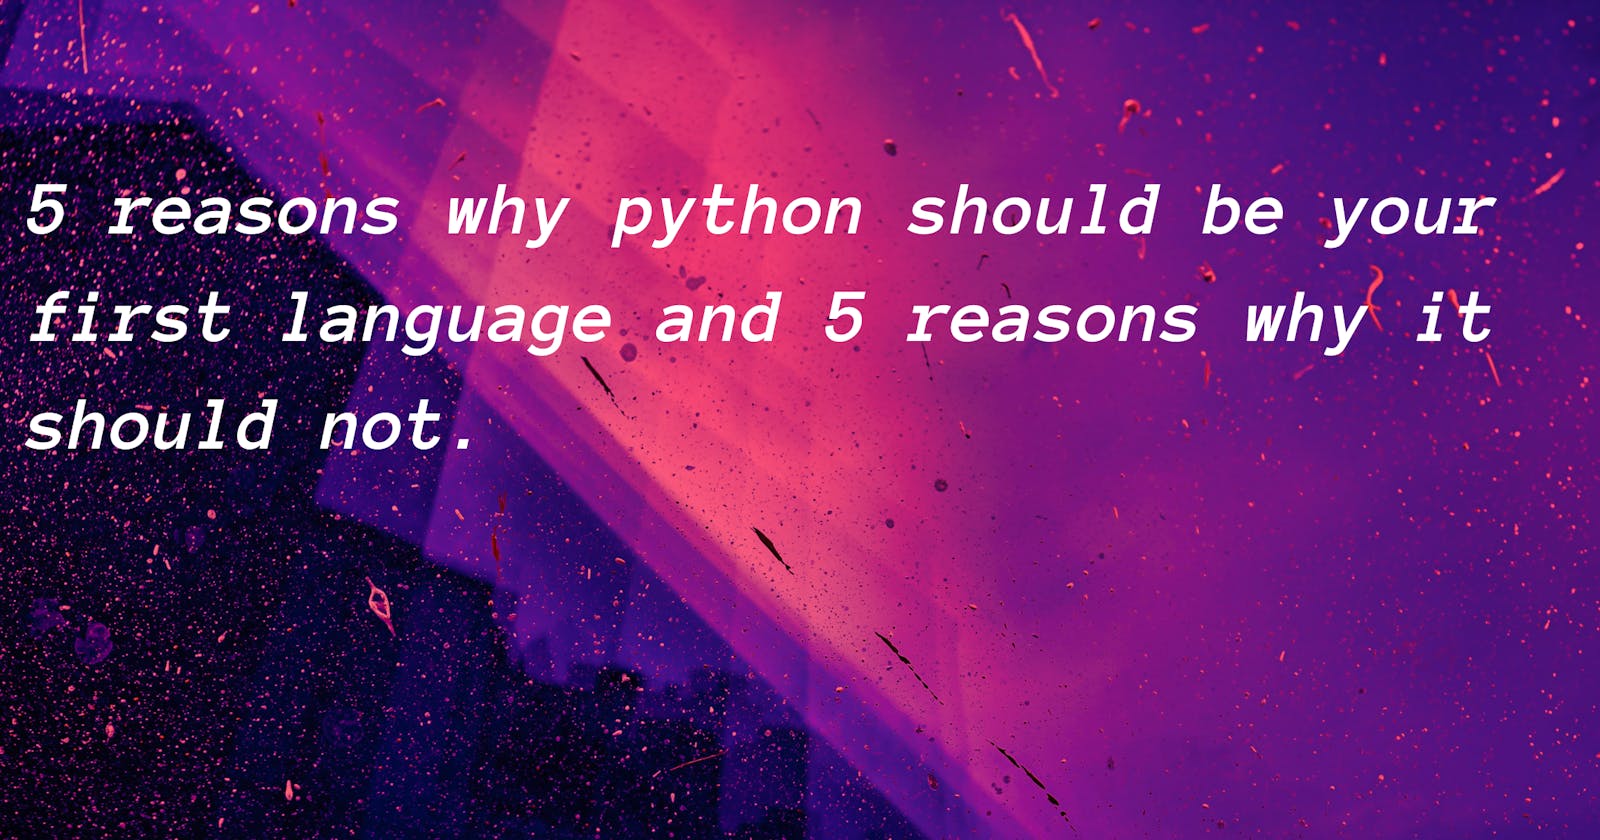 5 Reasons why python should be your first programming language and 5 reasons why it should not !